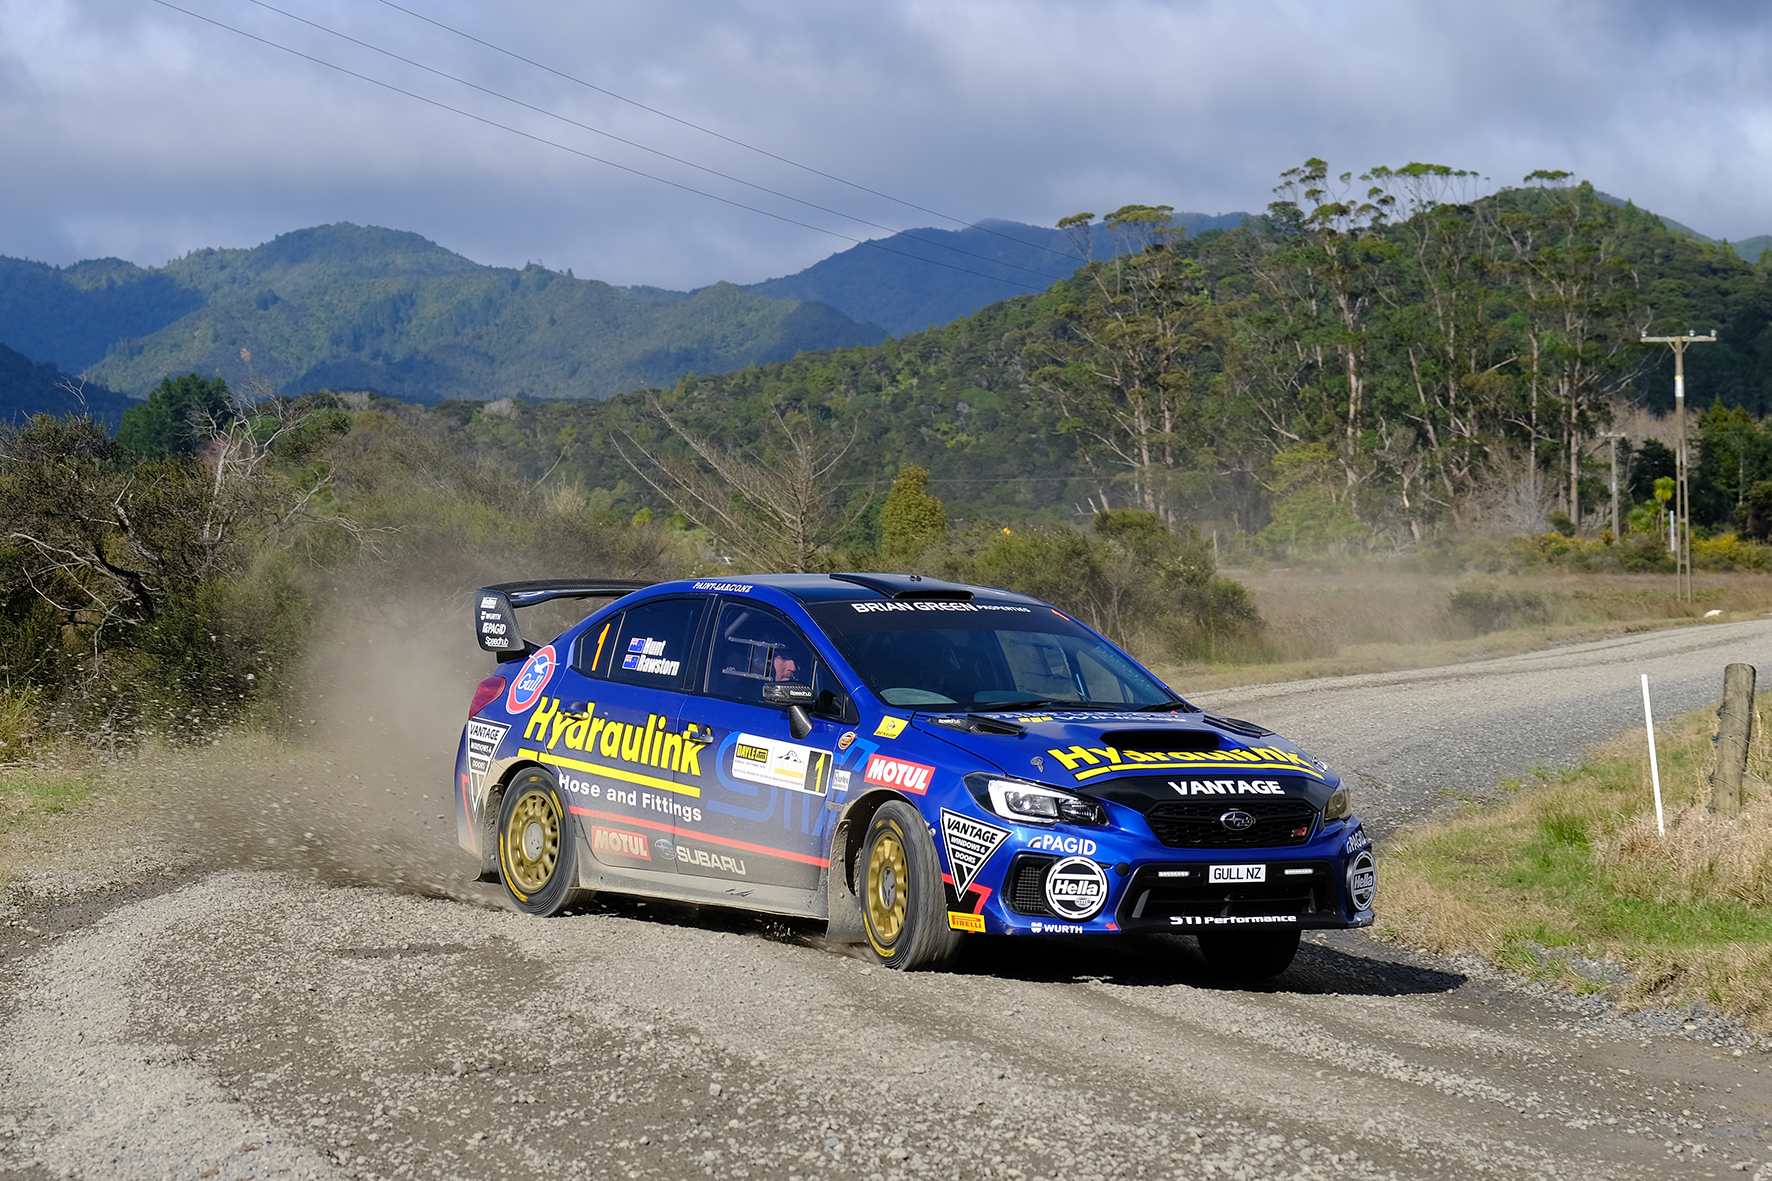 Ben Hunt won the New Zealand Rally Championship in 2019 after a stellar year. Photo credit: Geoff Ridder.